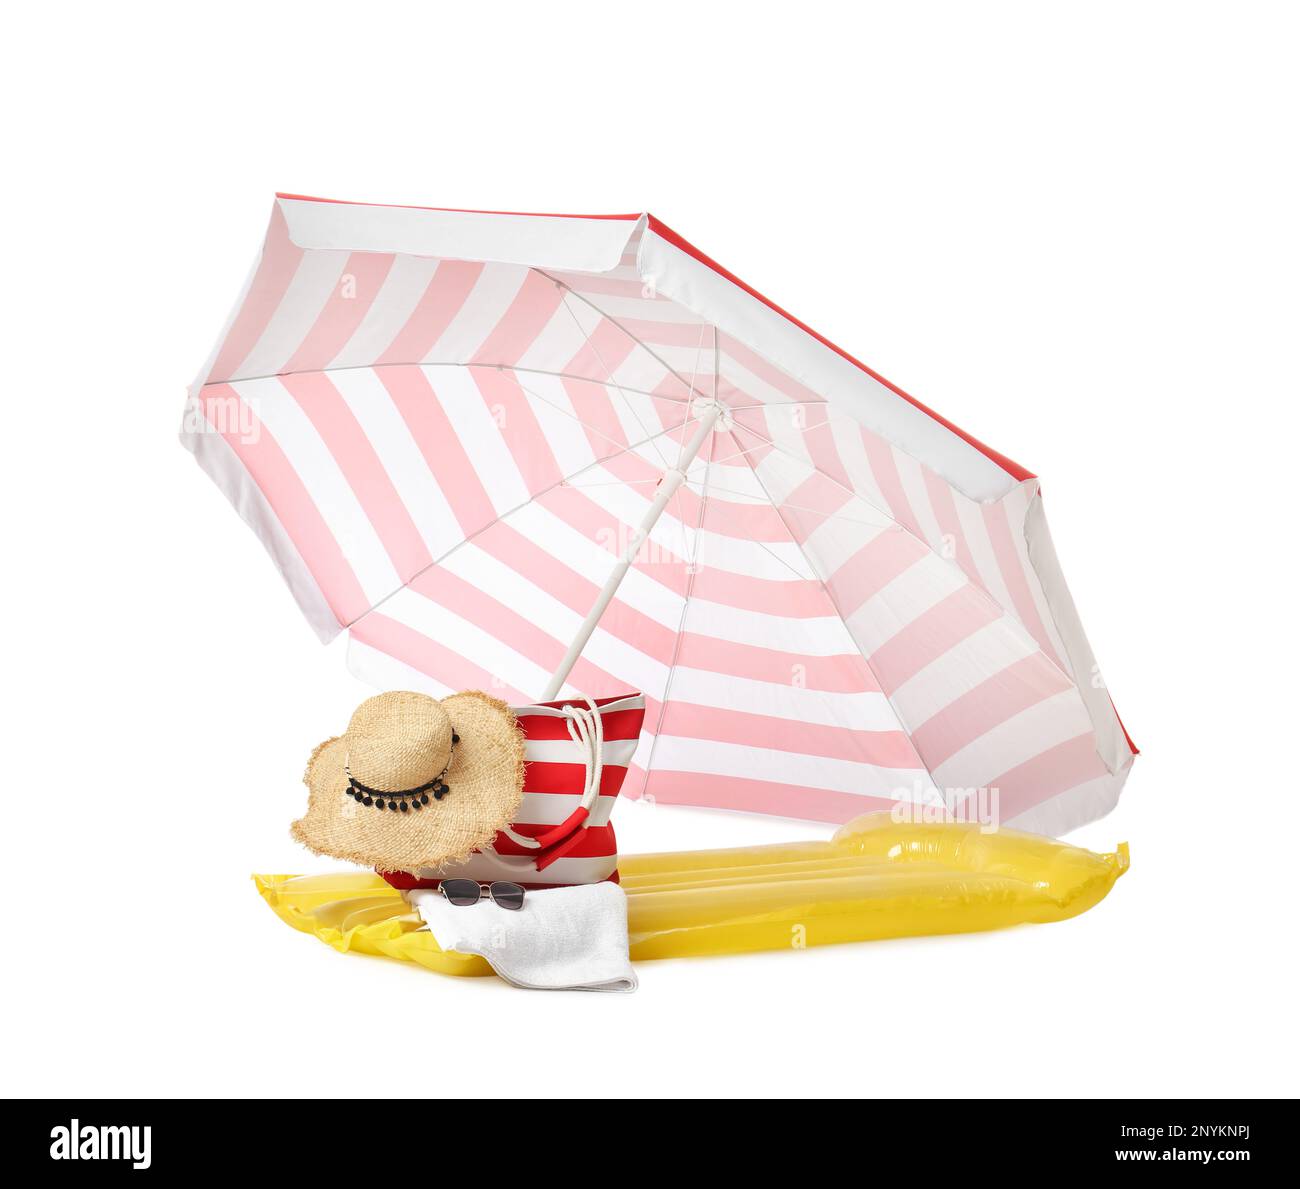 Open striped beach umbrella, inflatable mattress, bag and accessories on white background Stock Photo